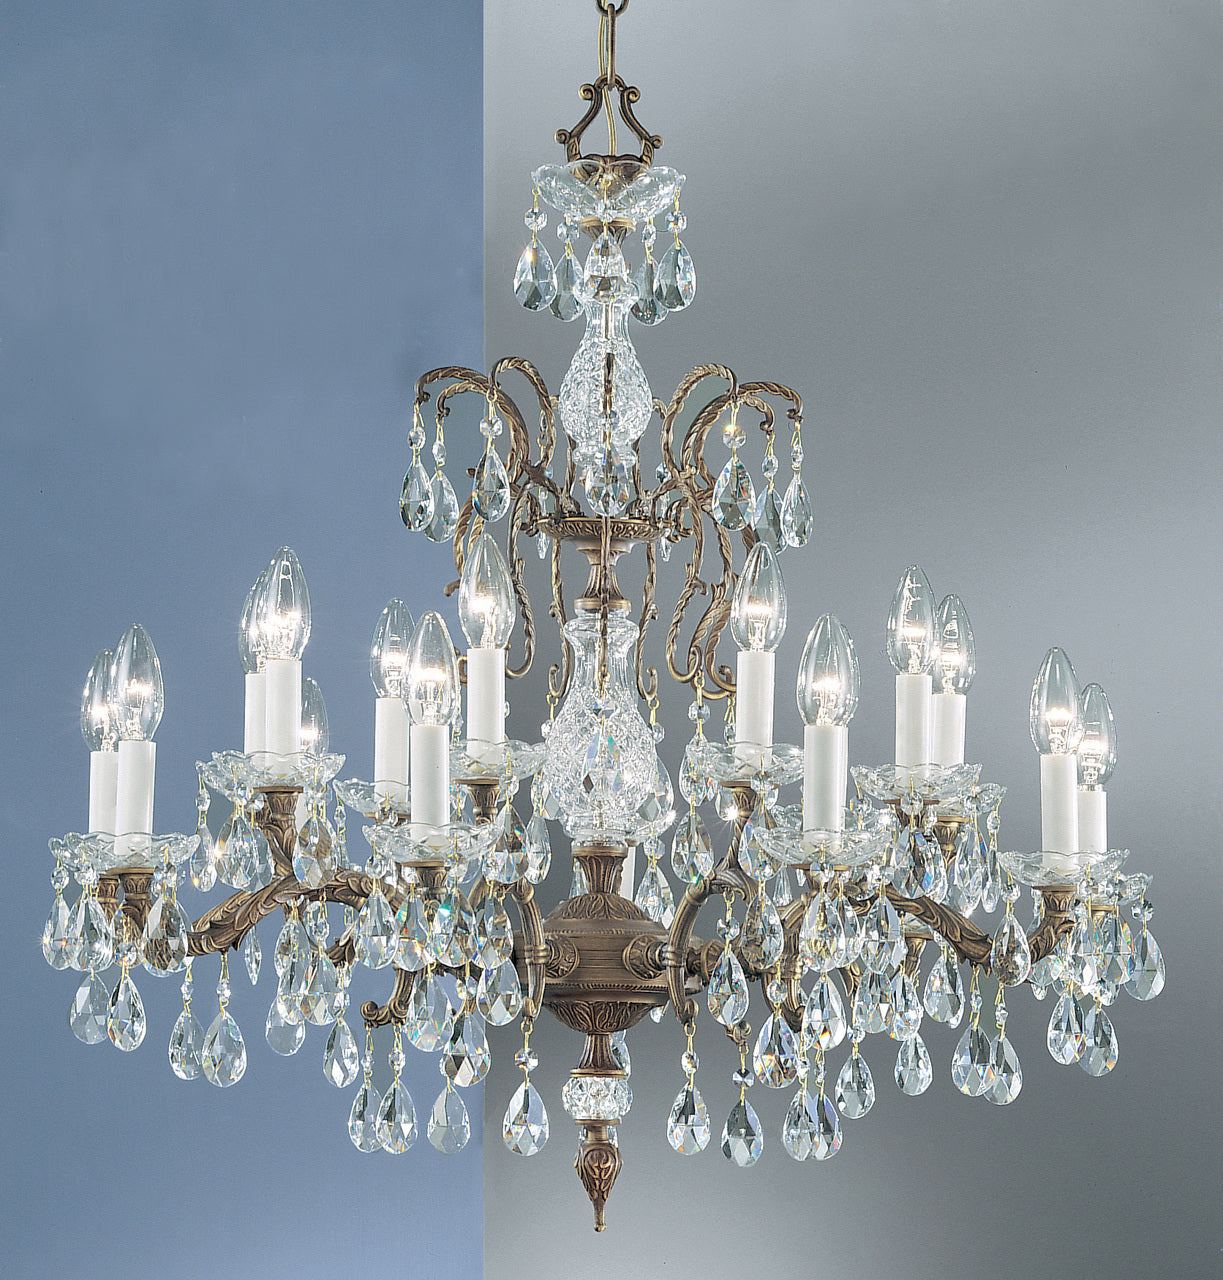 Classic Lighting 5538 RB SGT Madrid Crystal/Cast Brass Chandelier in Roman Bronze (Imported from Spain)